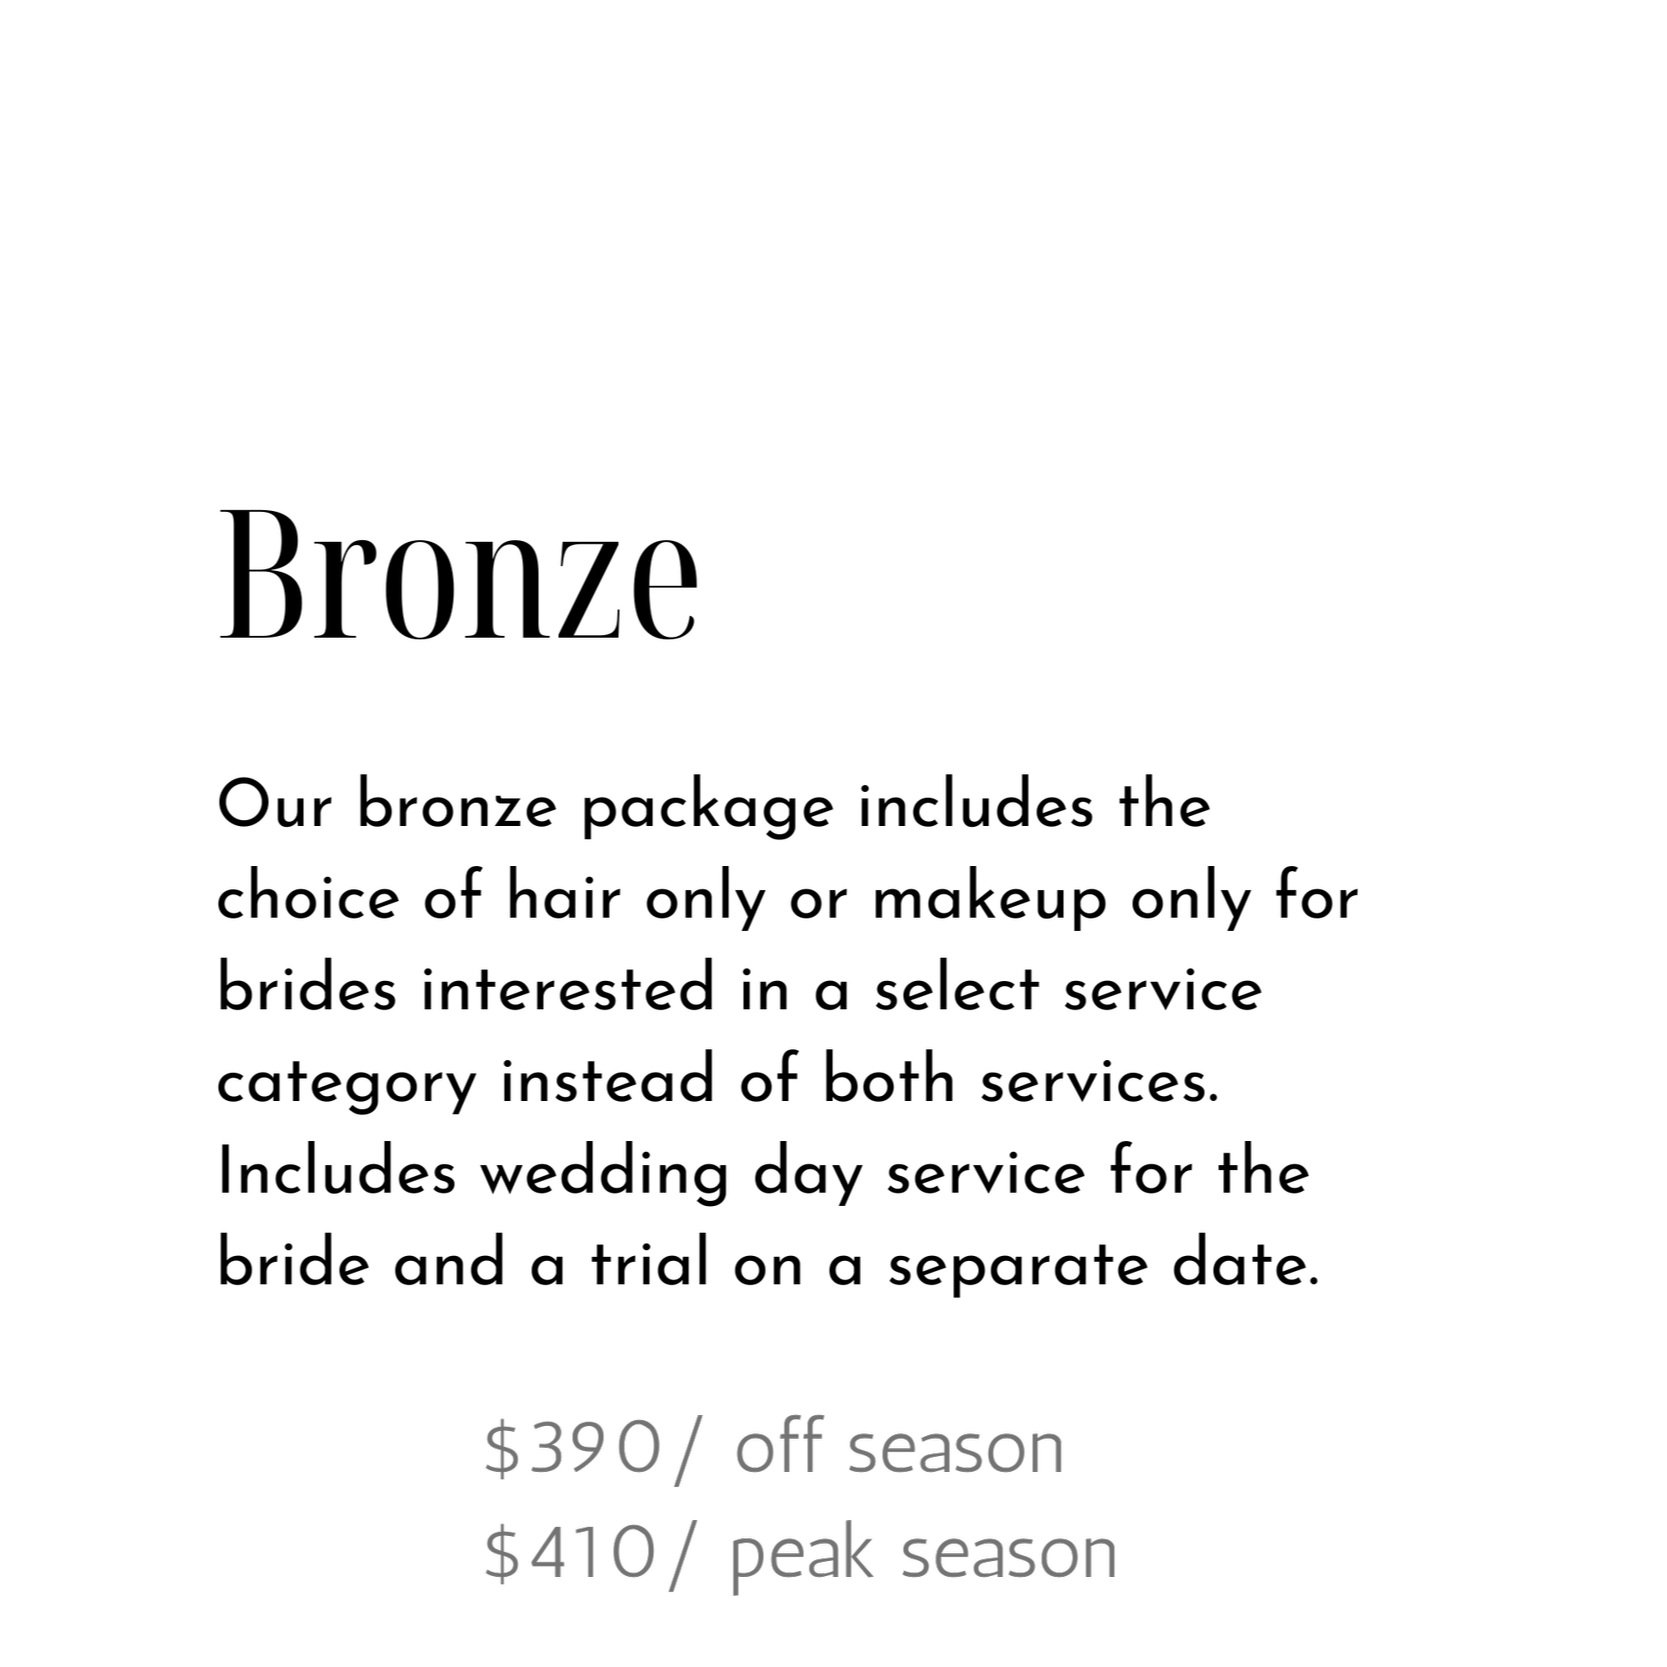 PACKAGES FOR THE BRIDE